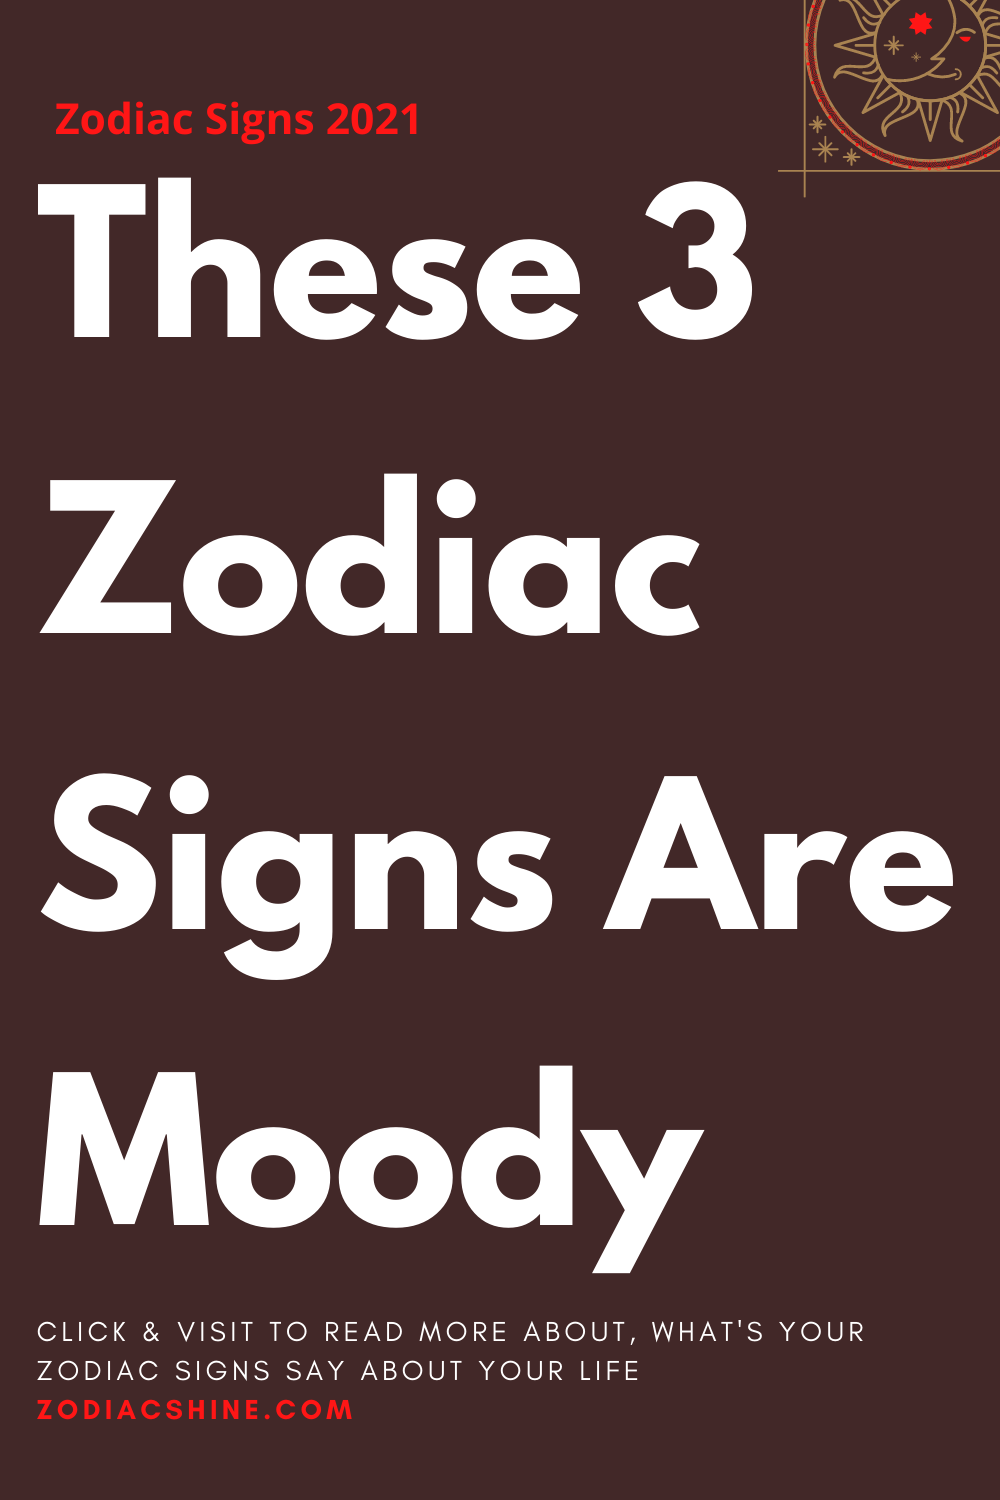 These 3 Zodiac Signs Are Moody